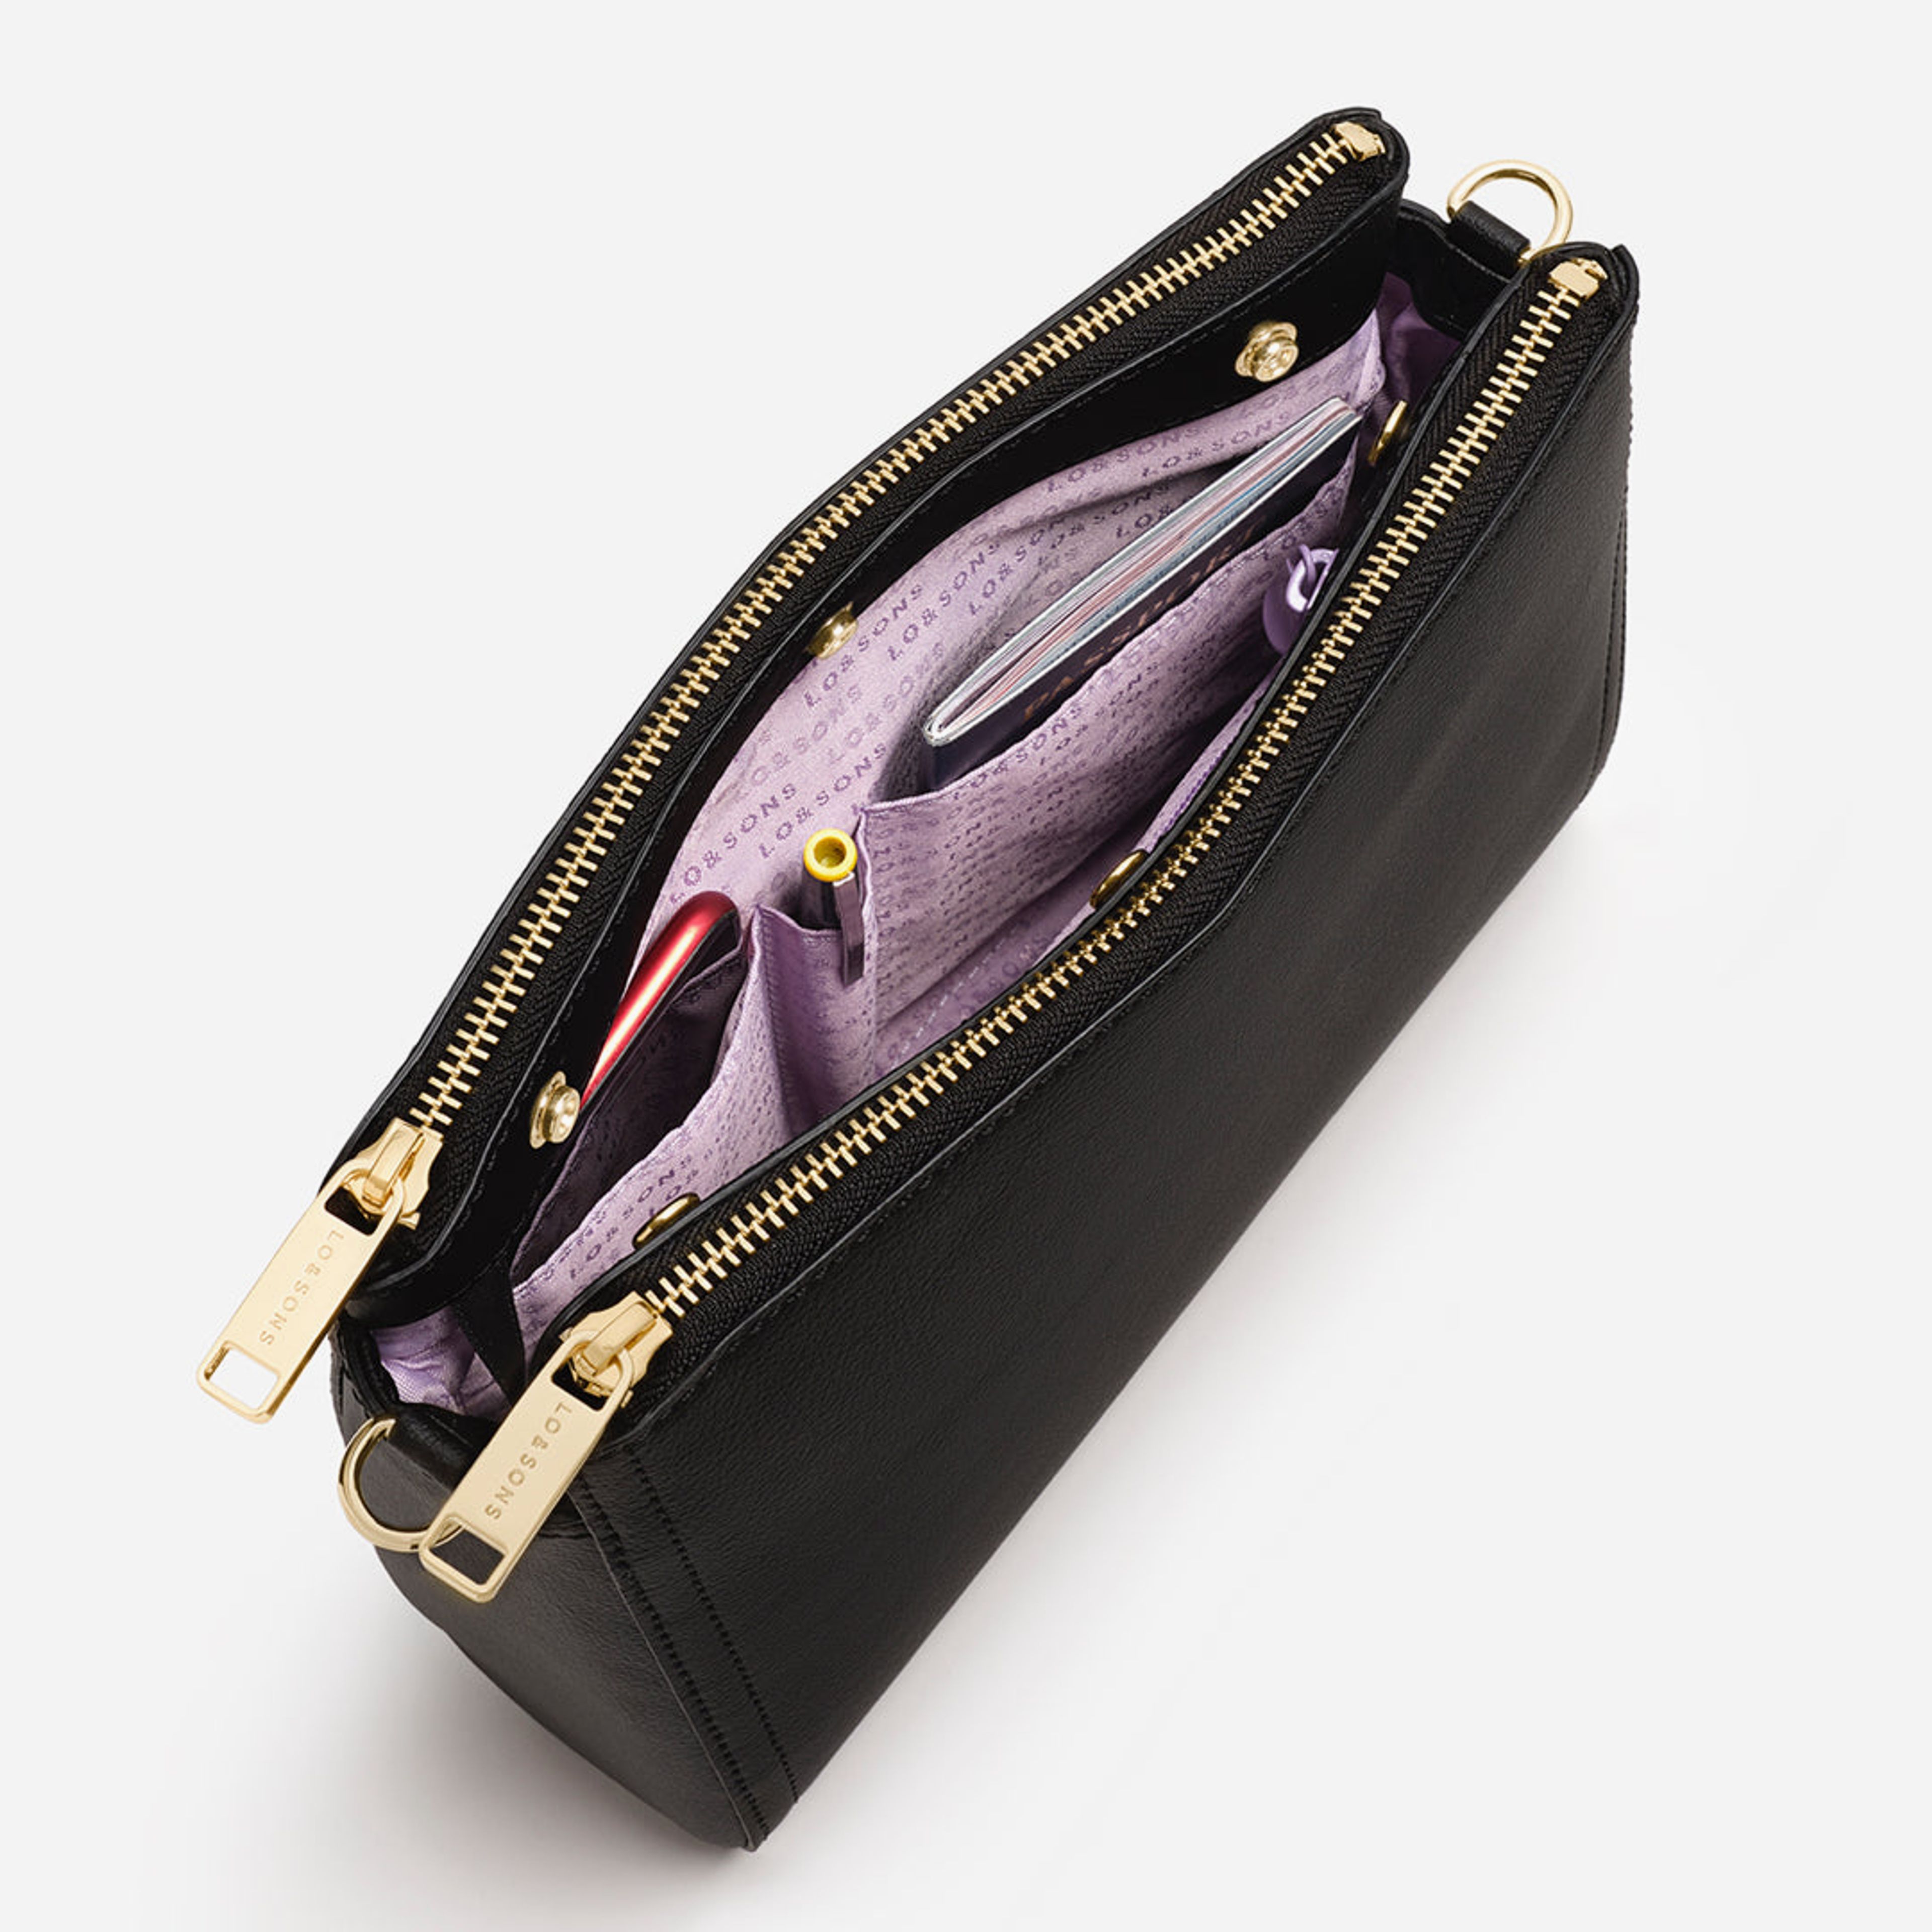 The Pearl - Cactus Leather - Black / Gold / Lavender